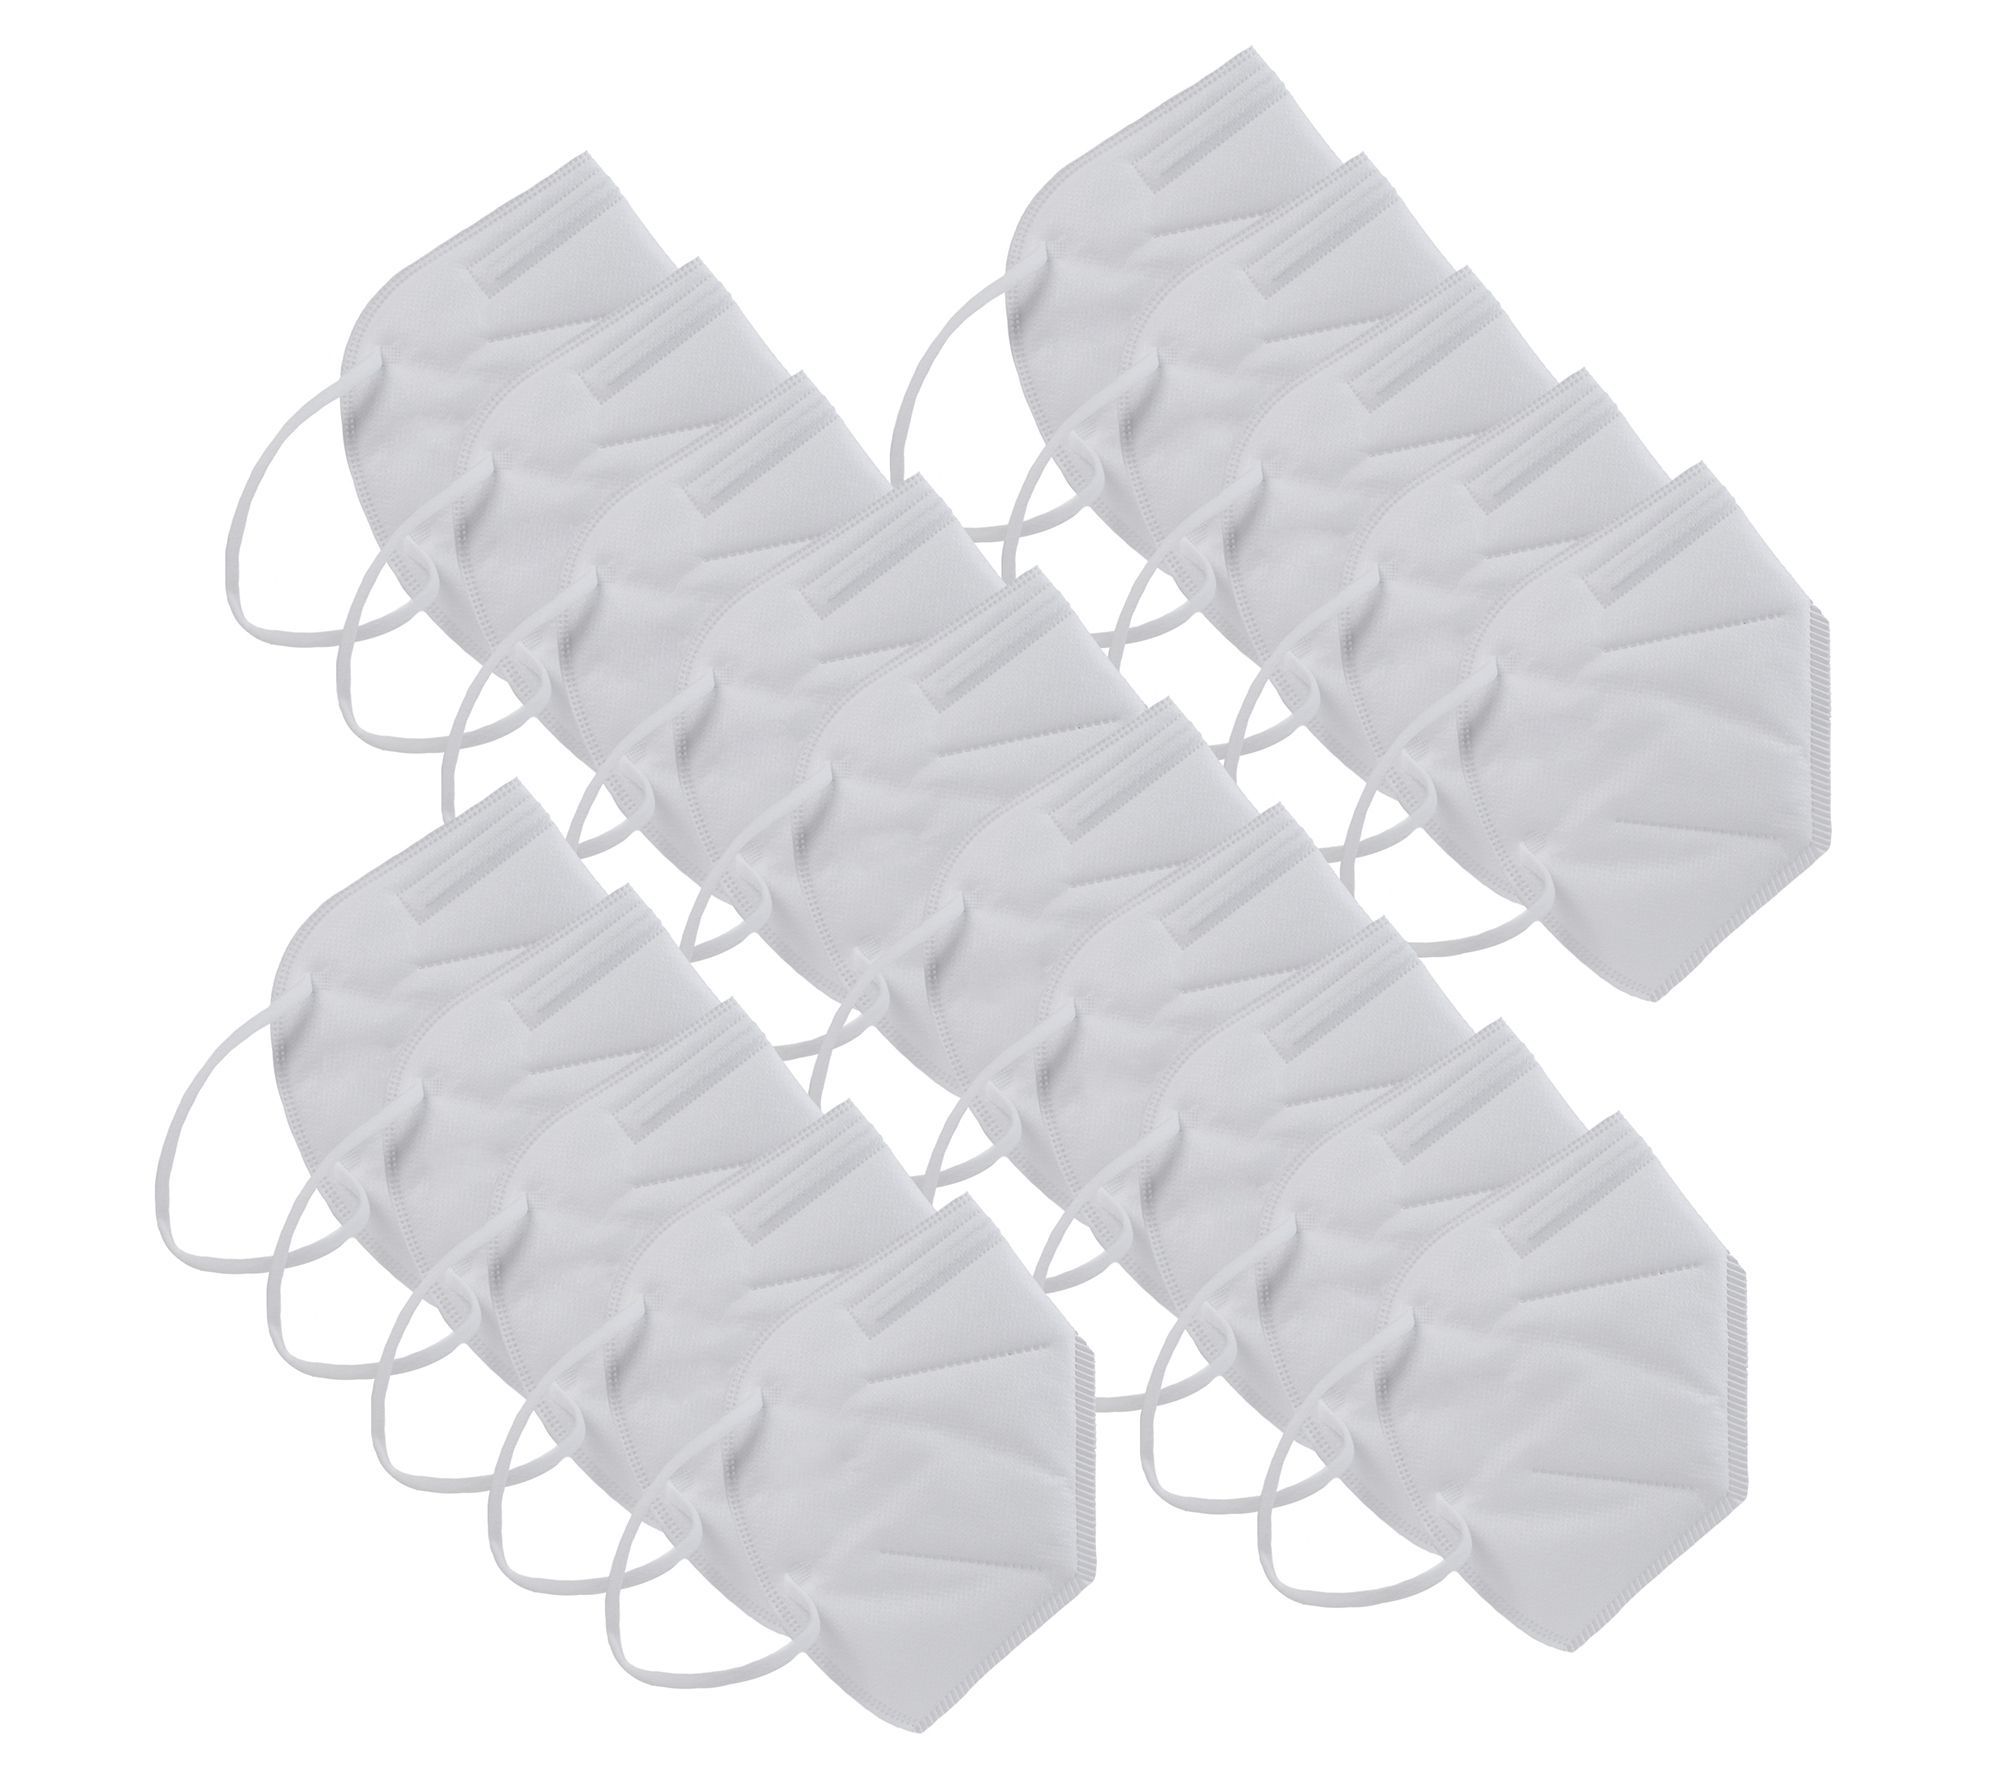 Set of 20 Protective Face Coverings for General Use Non-Medical - QVC.com